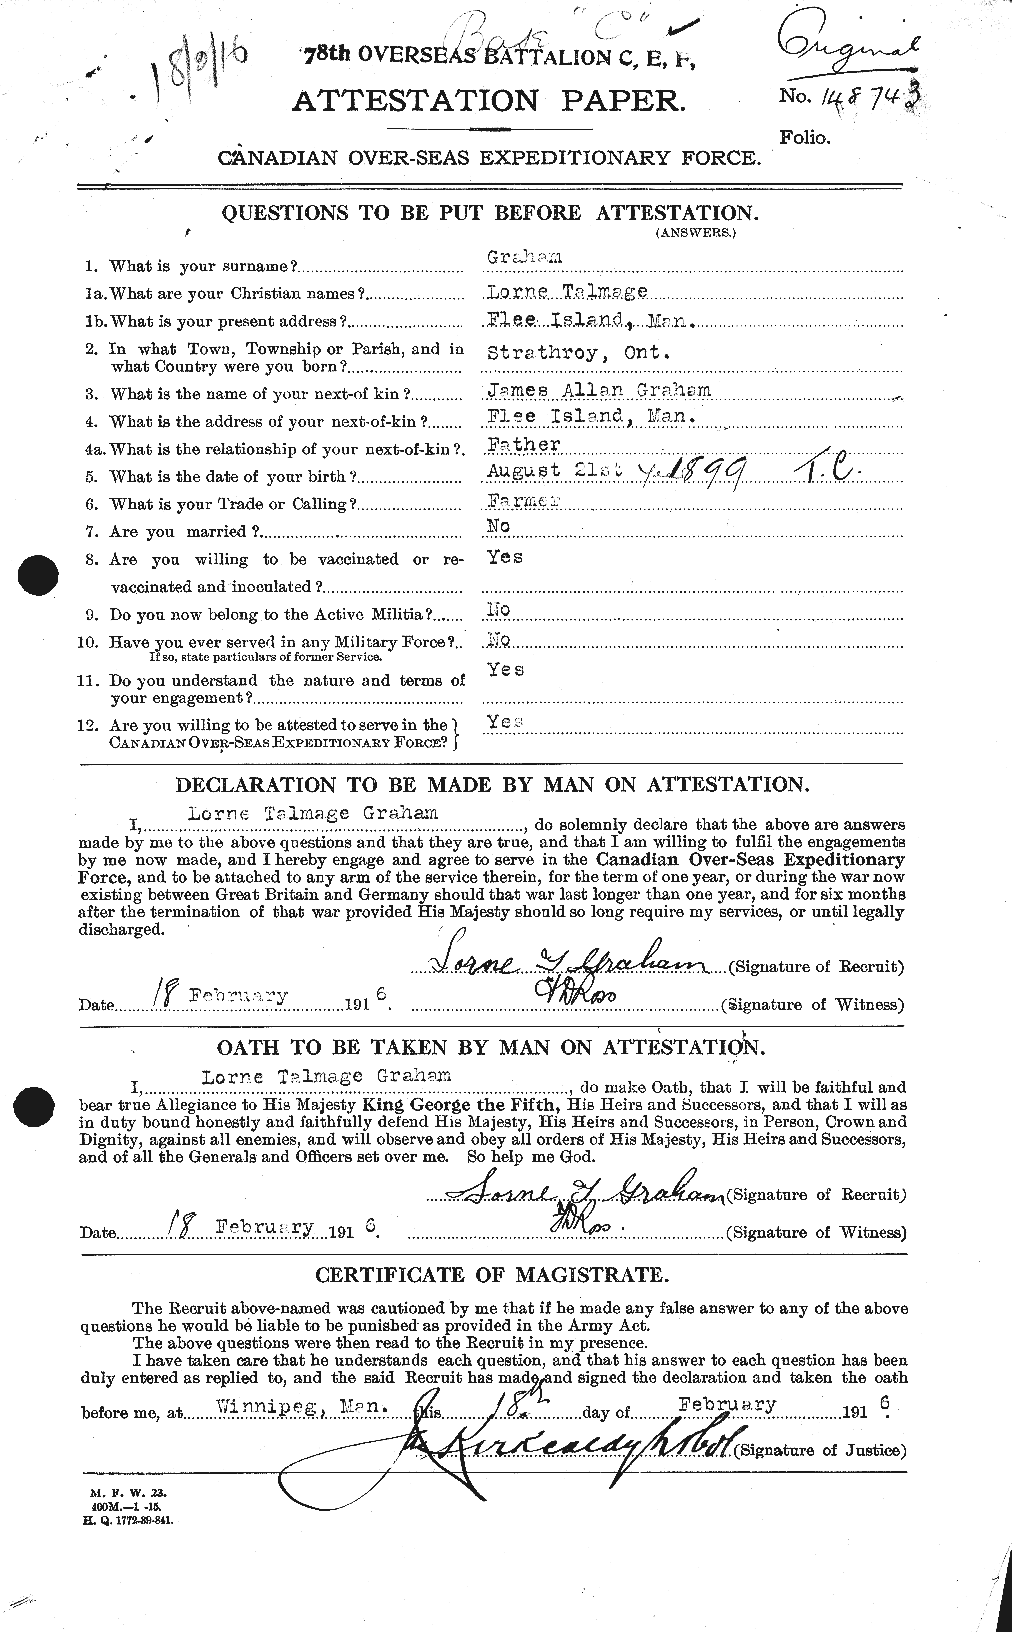 Personnel Records of the First World War - CEF 359282a